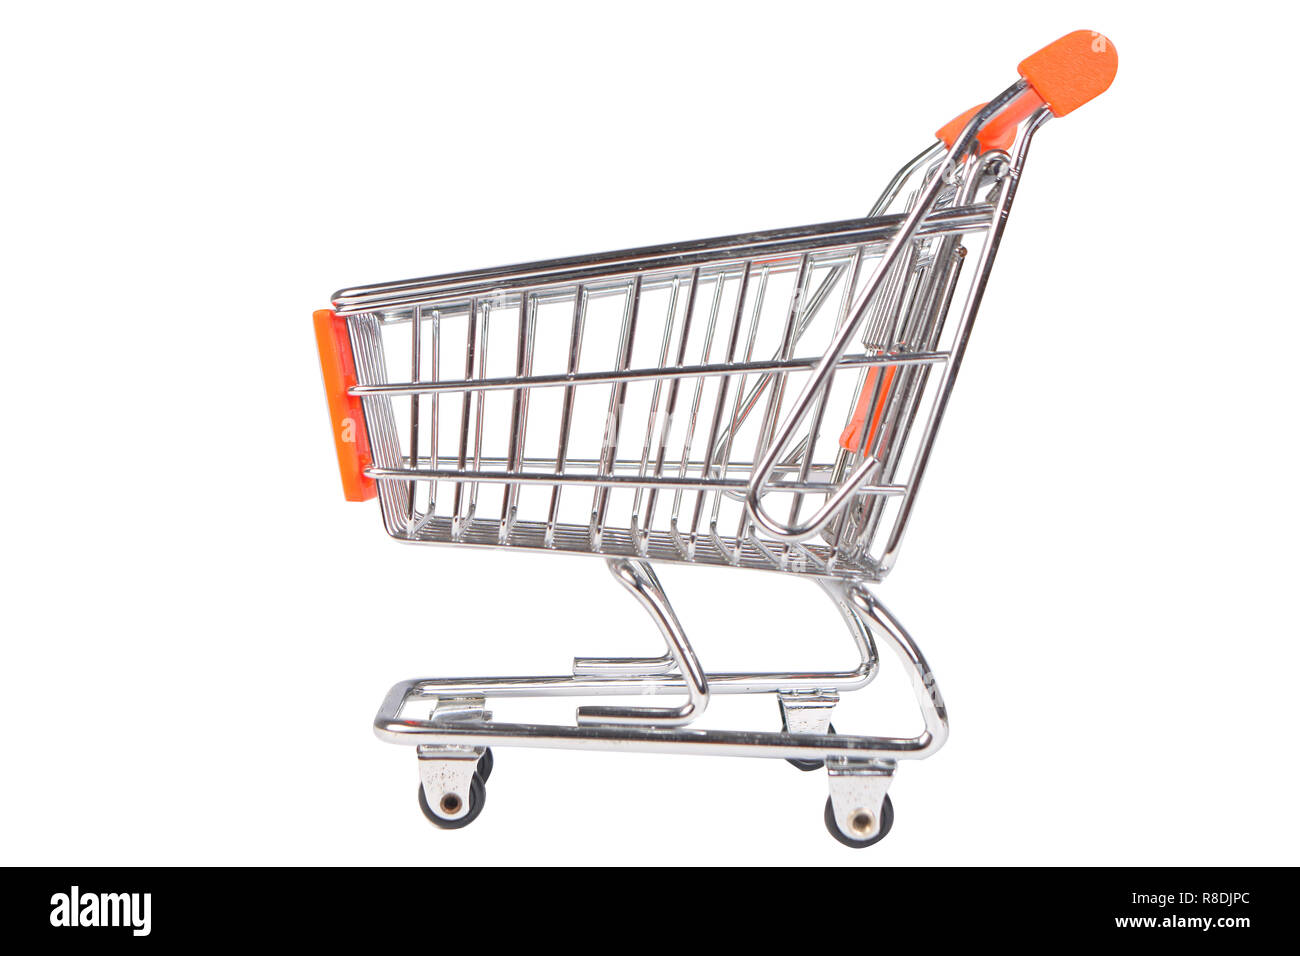 Photo image of a shopping trolley isolated on white Stock Photo